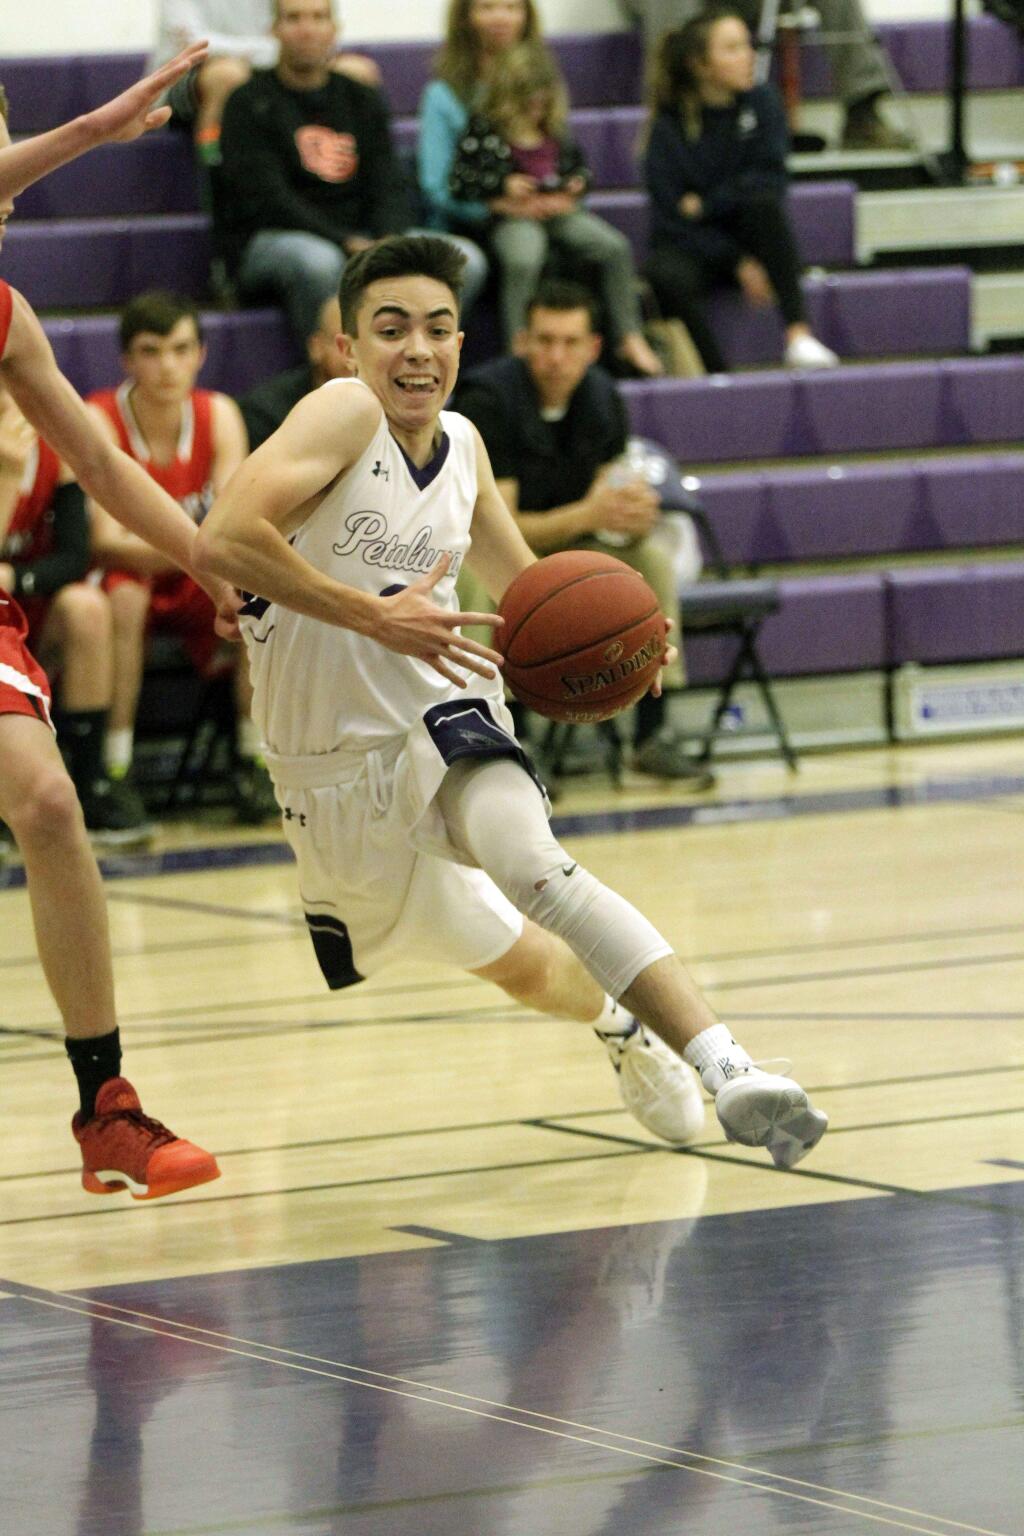 DWIGHT SUGIOKA/FOR THE ARGUS-COURIERPetaluma's Robbie Isetta drives to the hoop during the Trojans' win over El Molino.